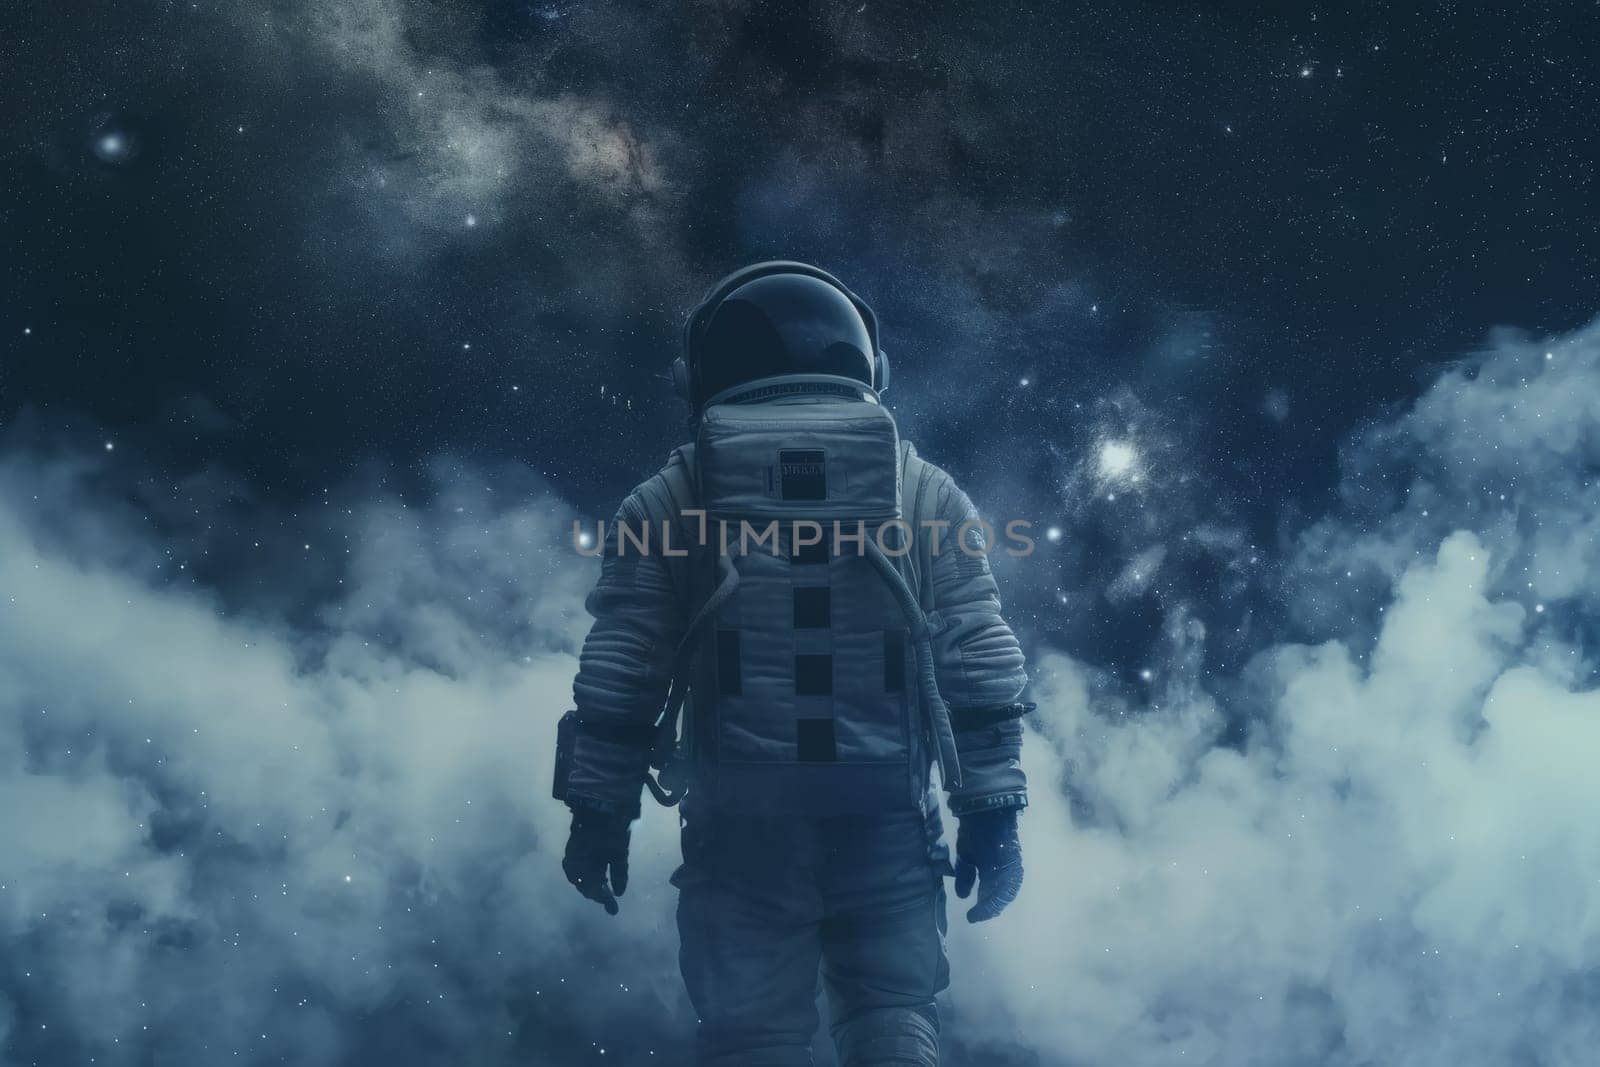 A man in a spacesuit stands in front of a cloud of smoke. The image has a dreamy, otherworldly feel to it, as if the man is exploring a new planet or galaxy. The smoke adds to the sense of mystery